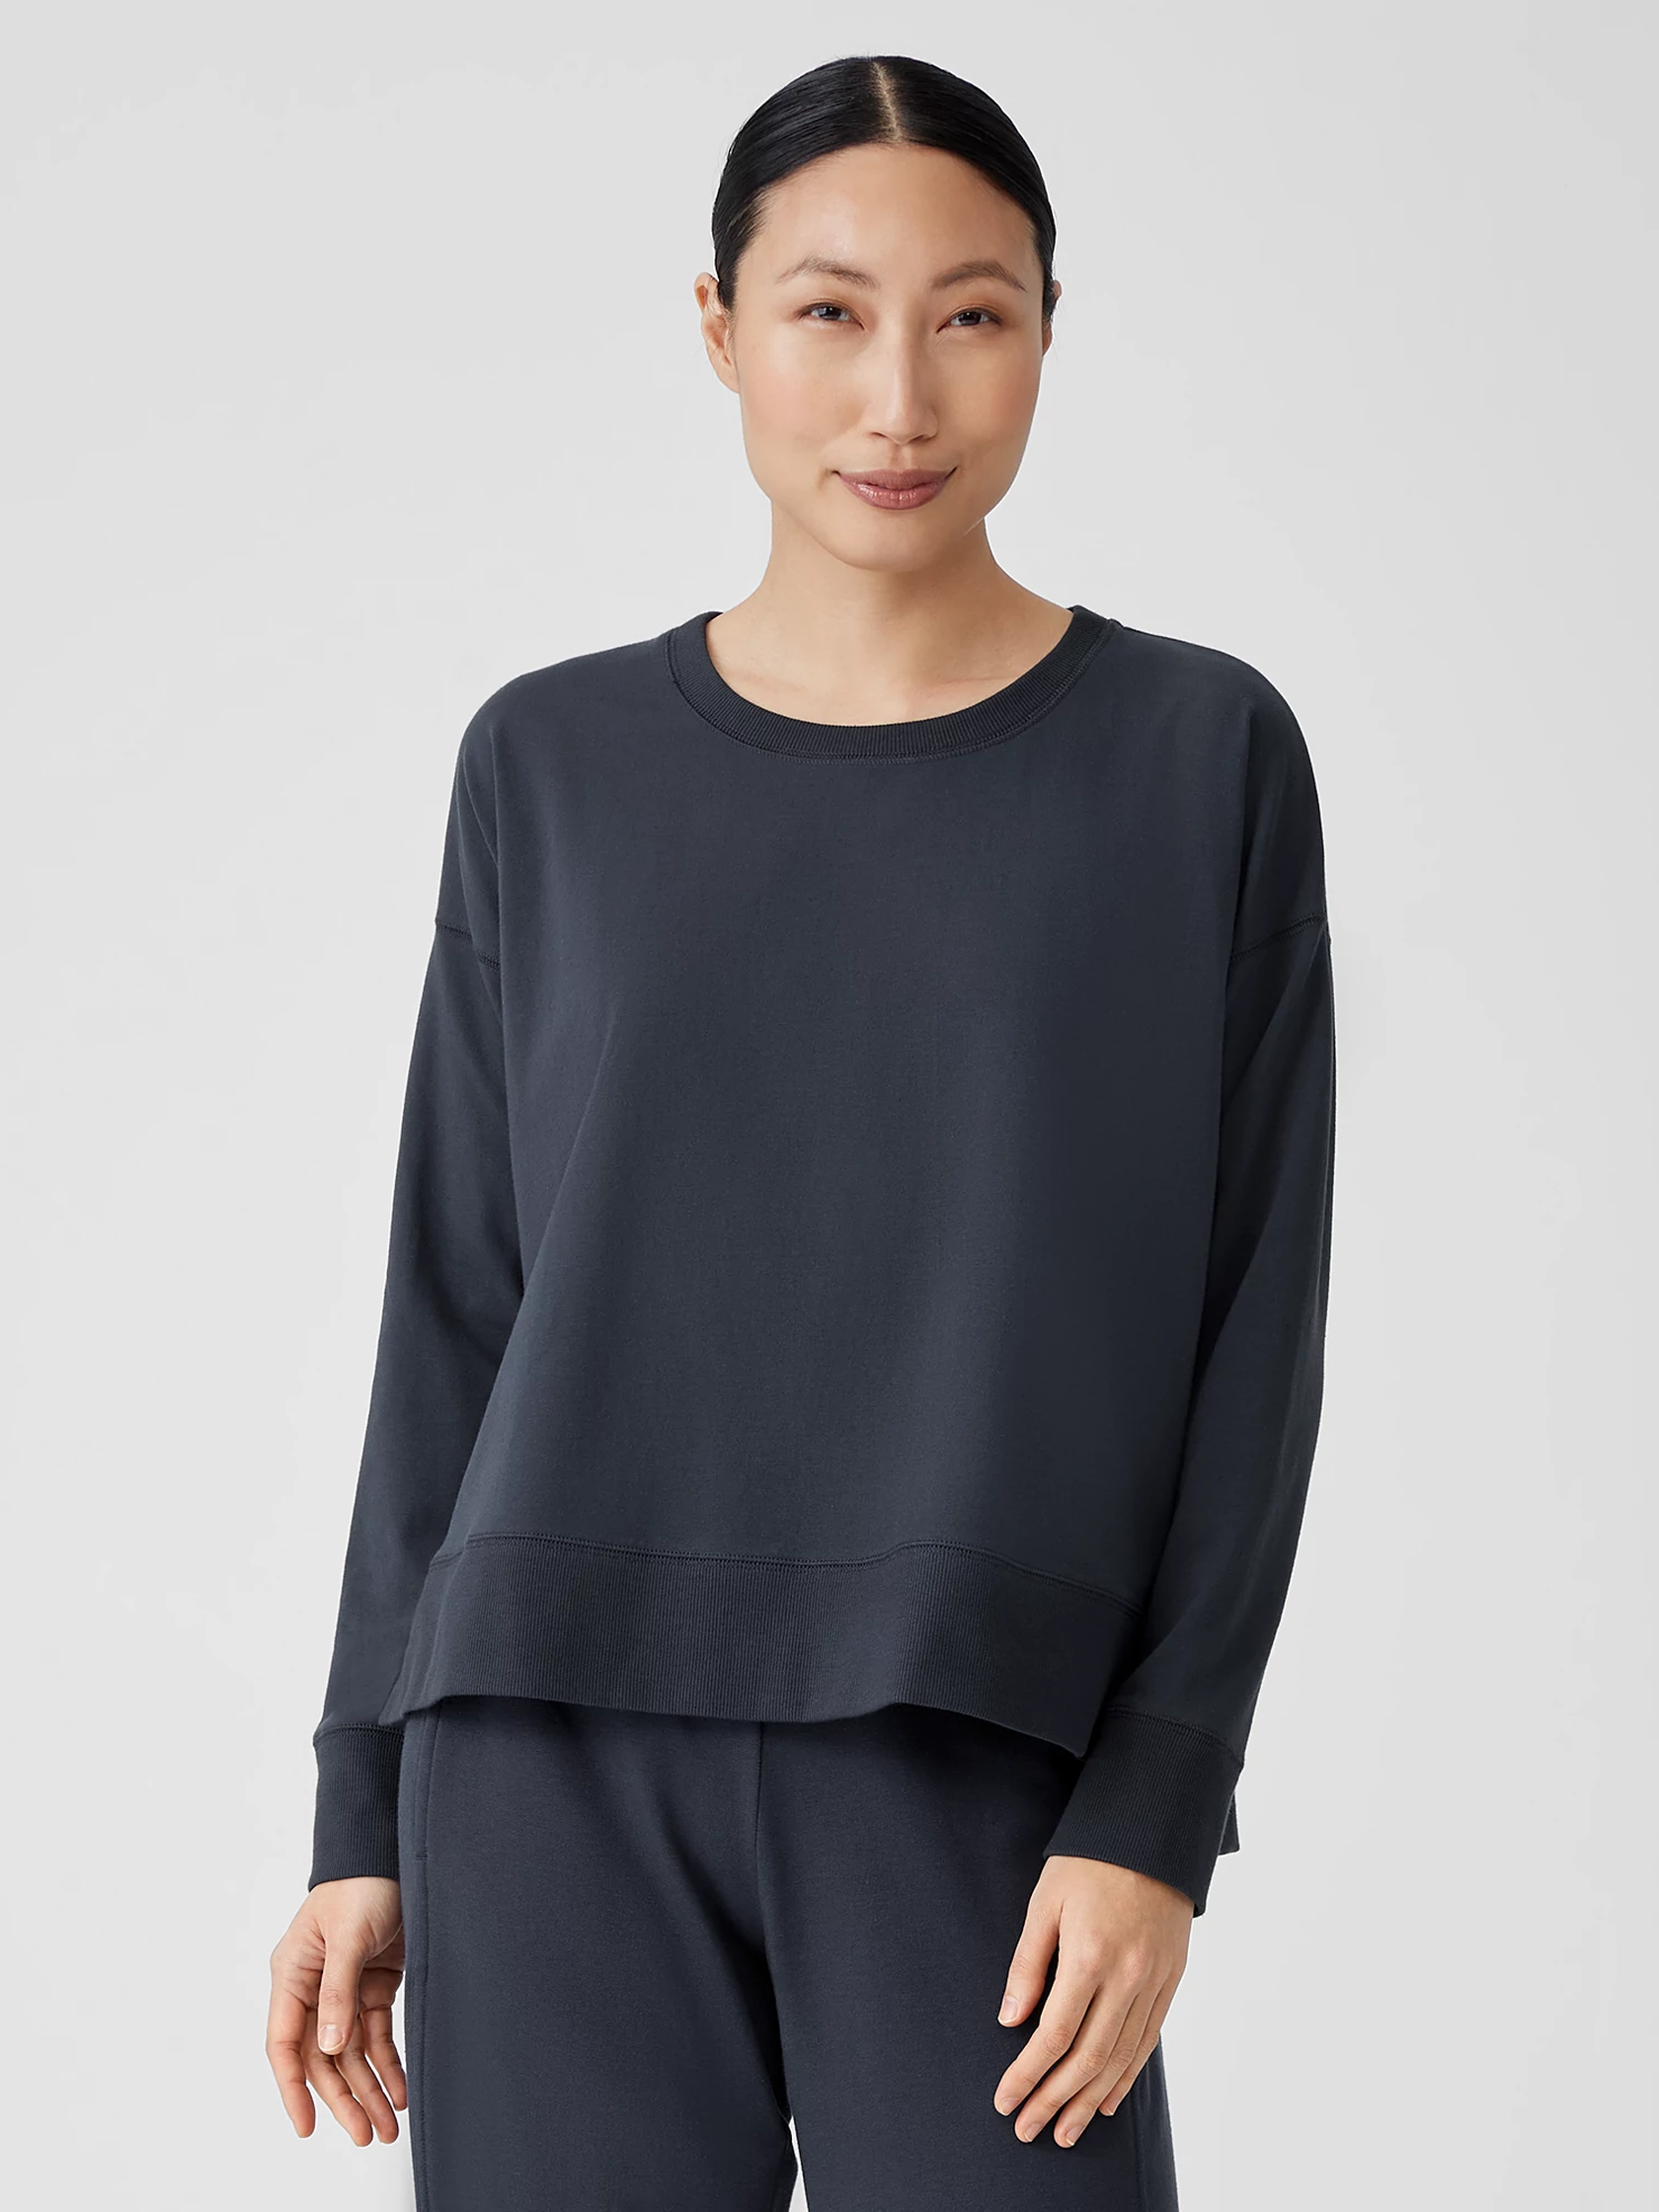 Traceable Organic Cotton Jersey Crew Neck Top | EILEEN FISHER